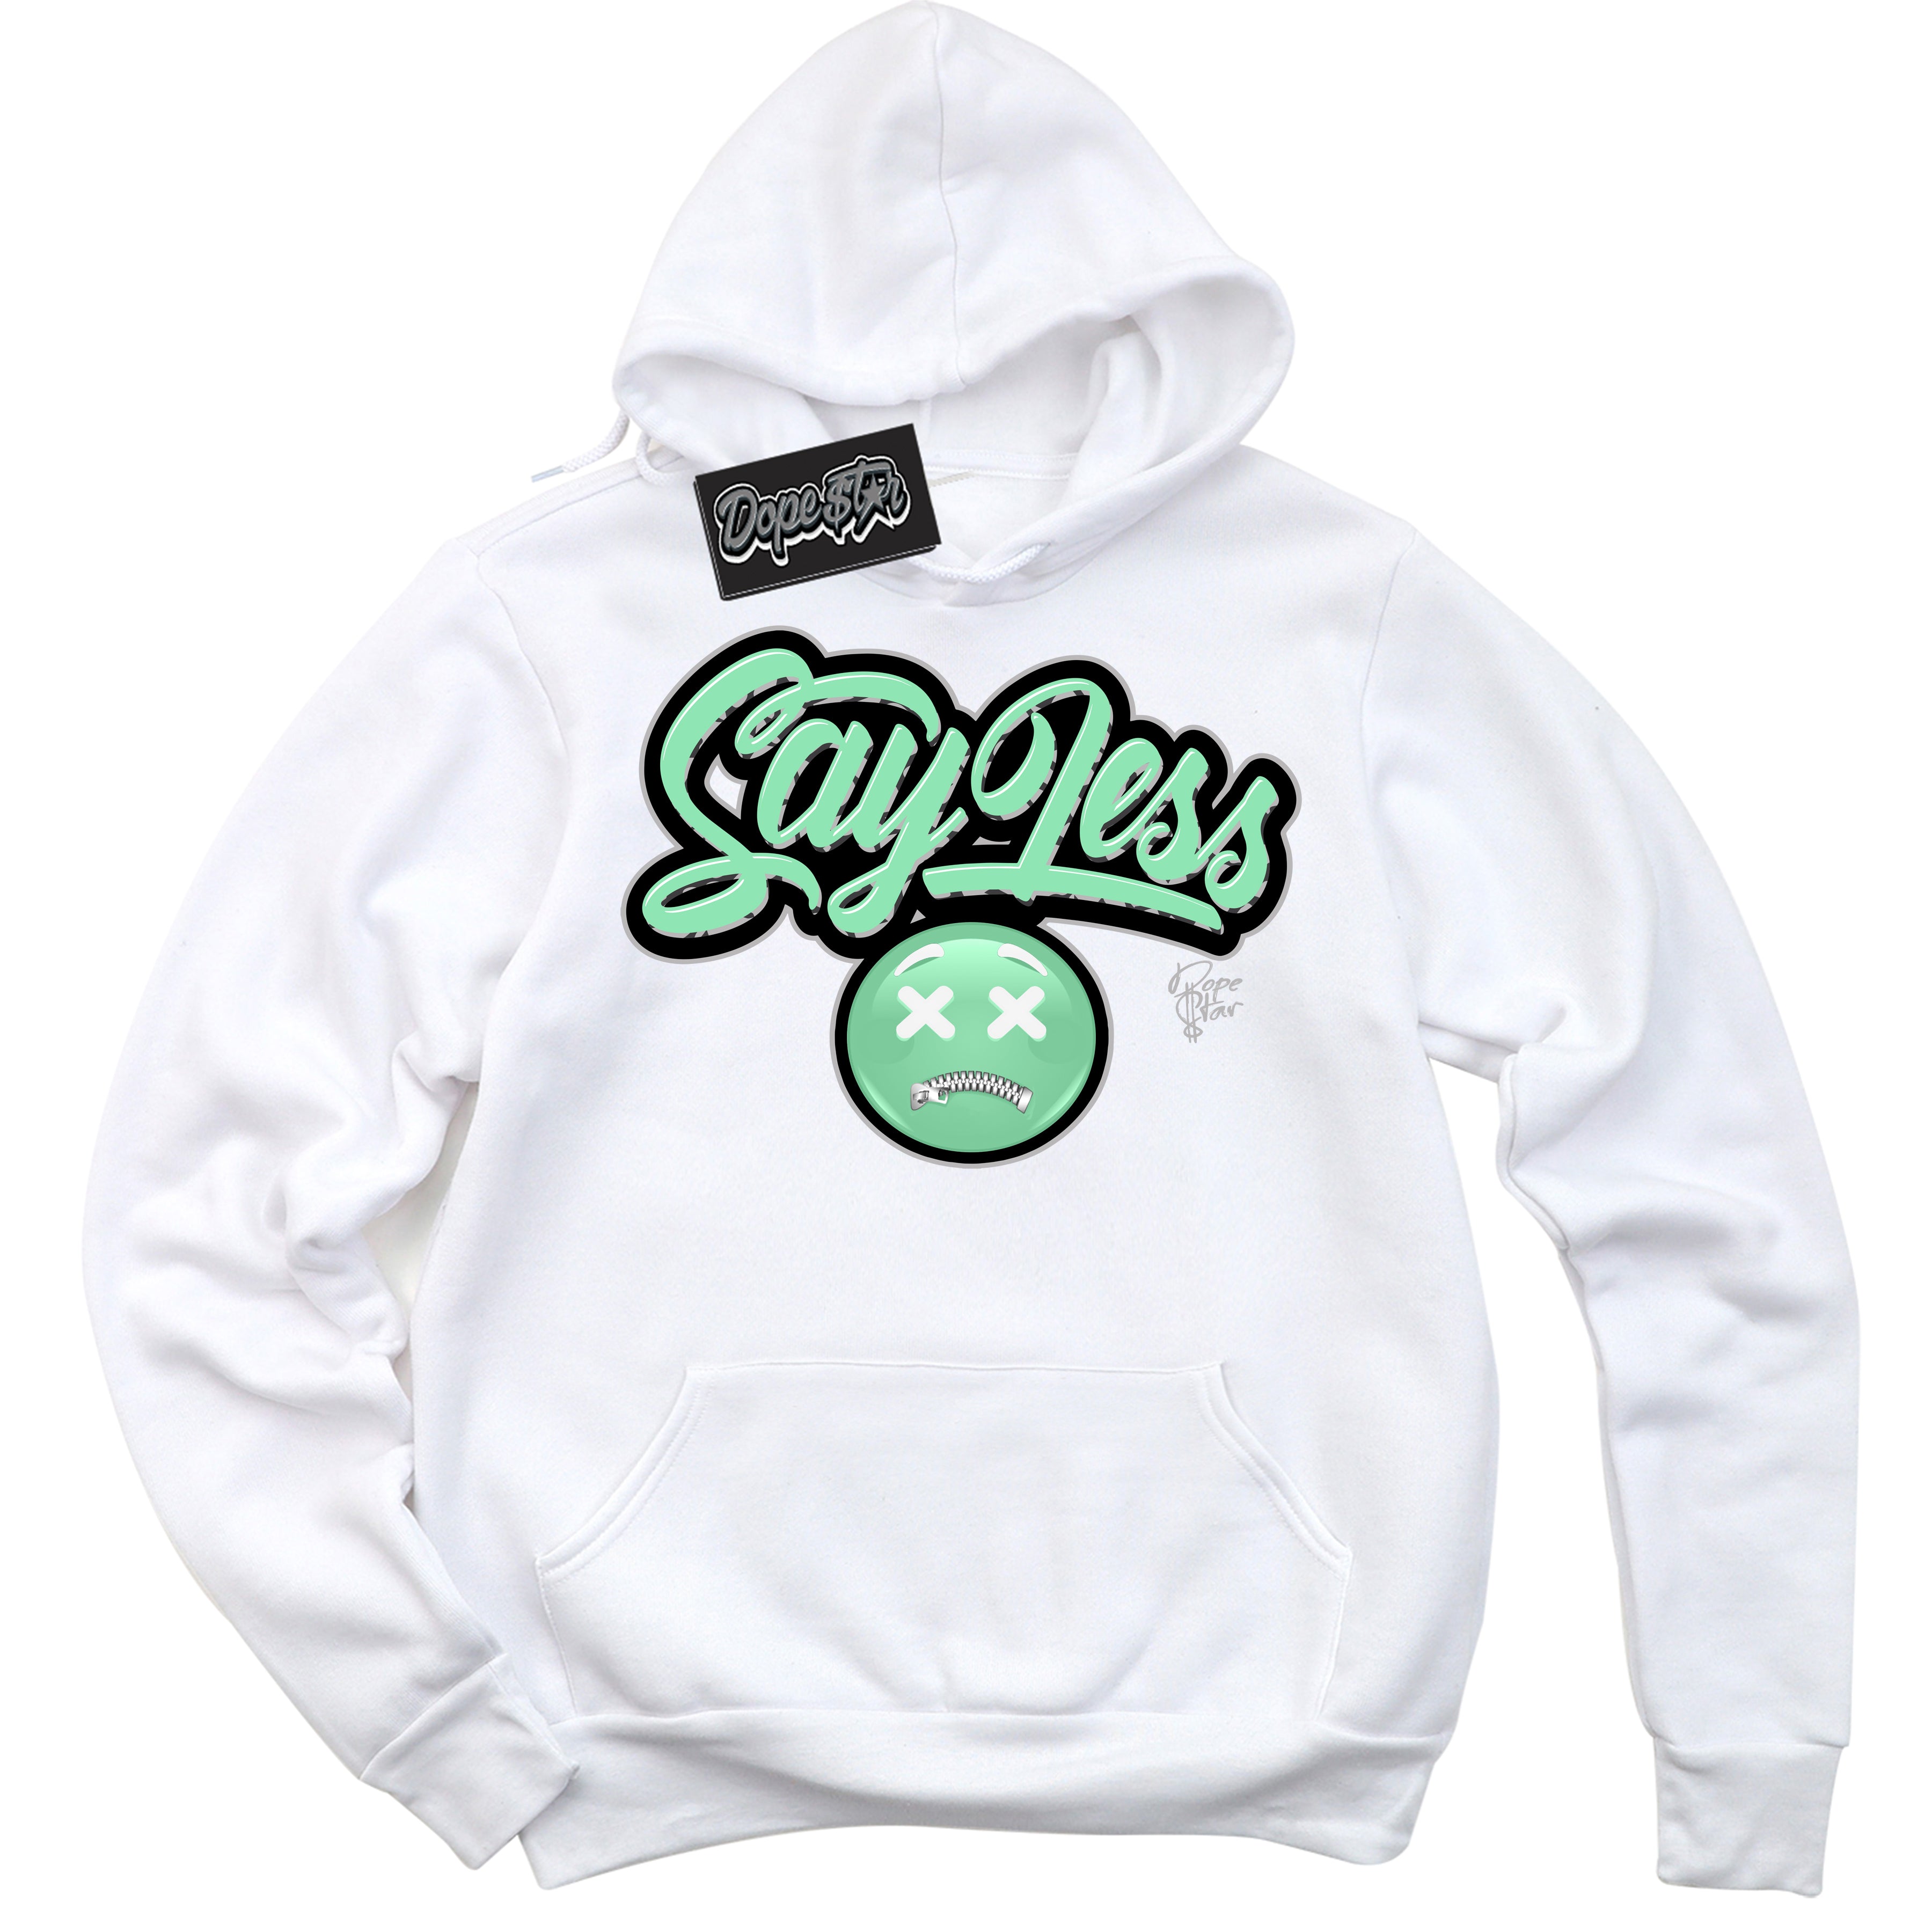 Cool White Graphic DopeStar Hoodie with “ Say Less “ print, that perfectly matches Green Glow 3s sneakers